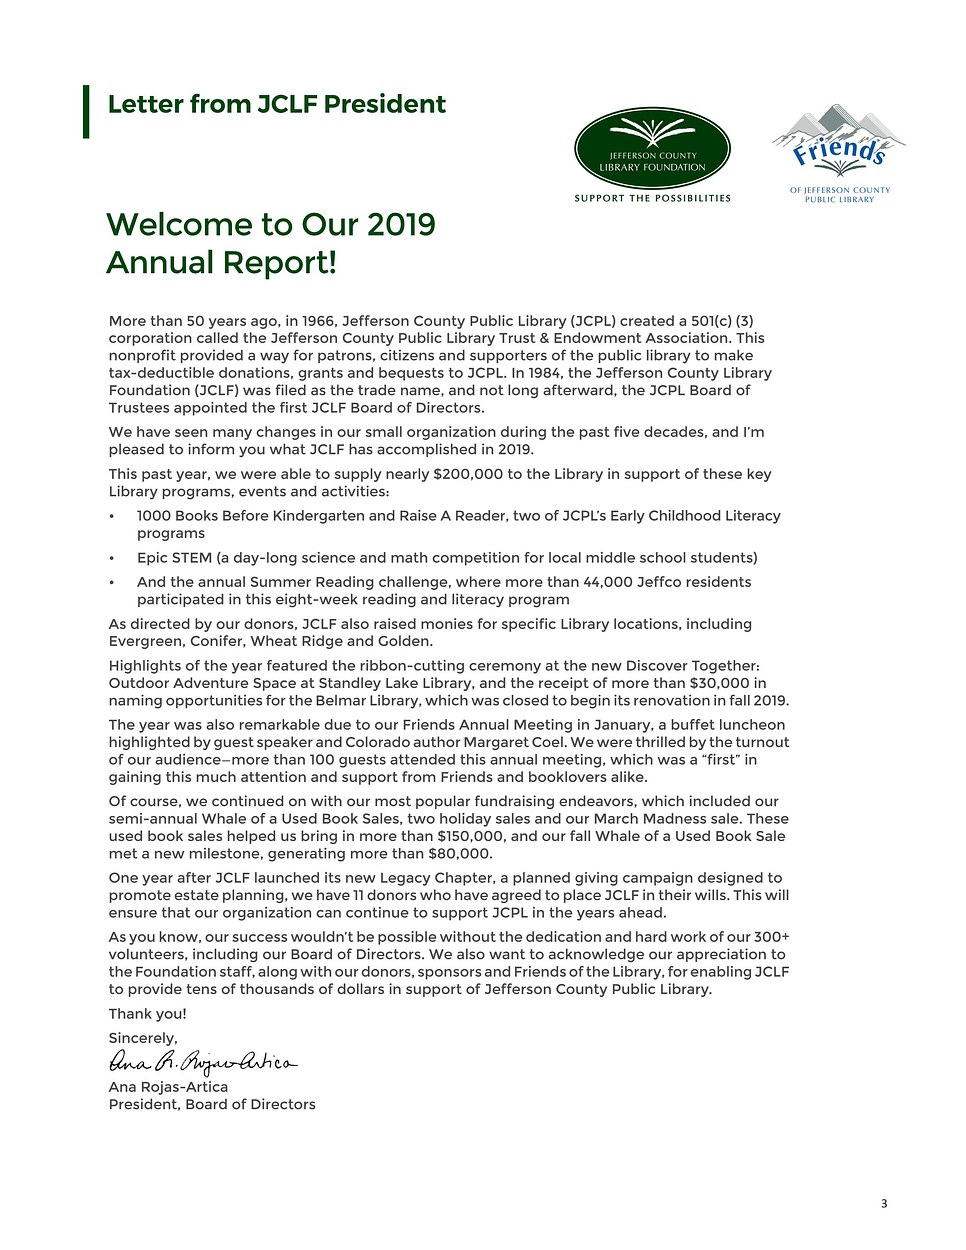 Annual Report Letter from Board President